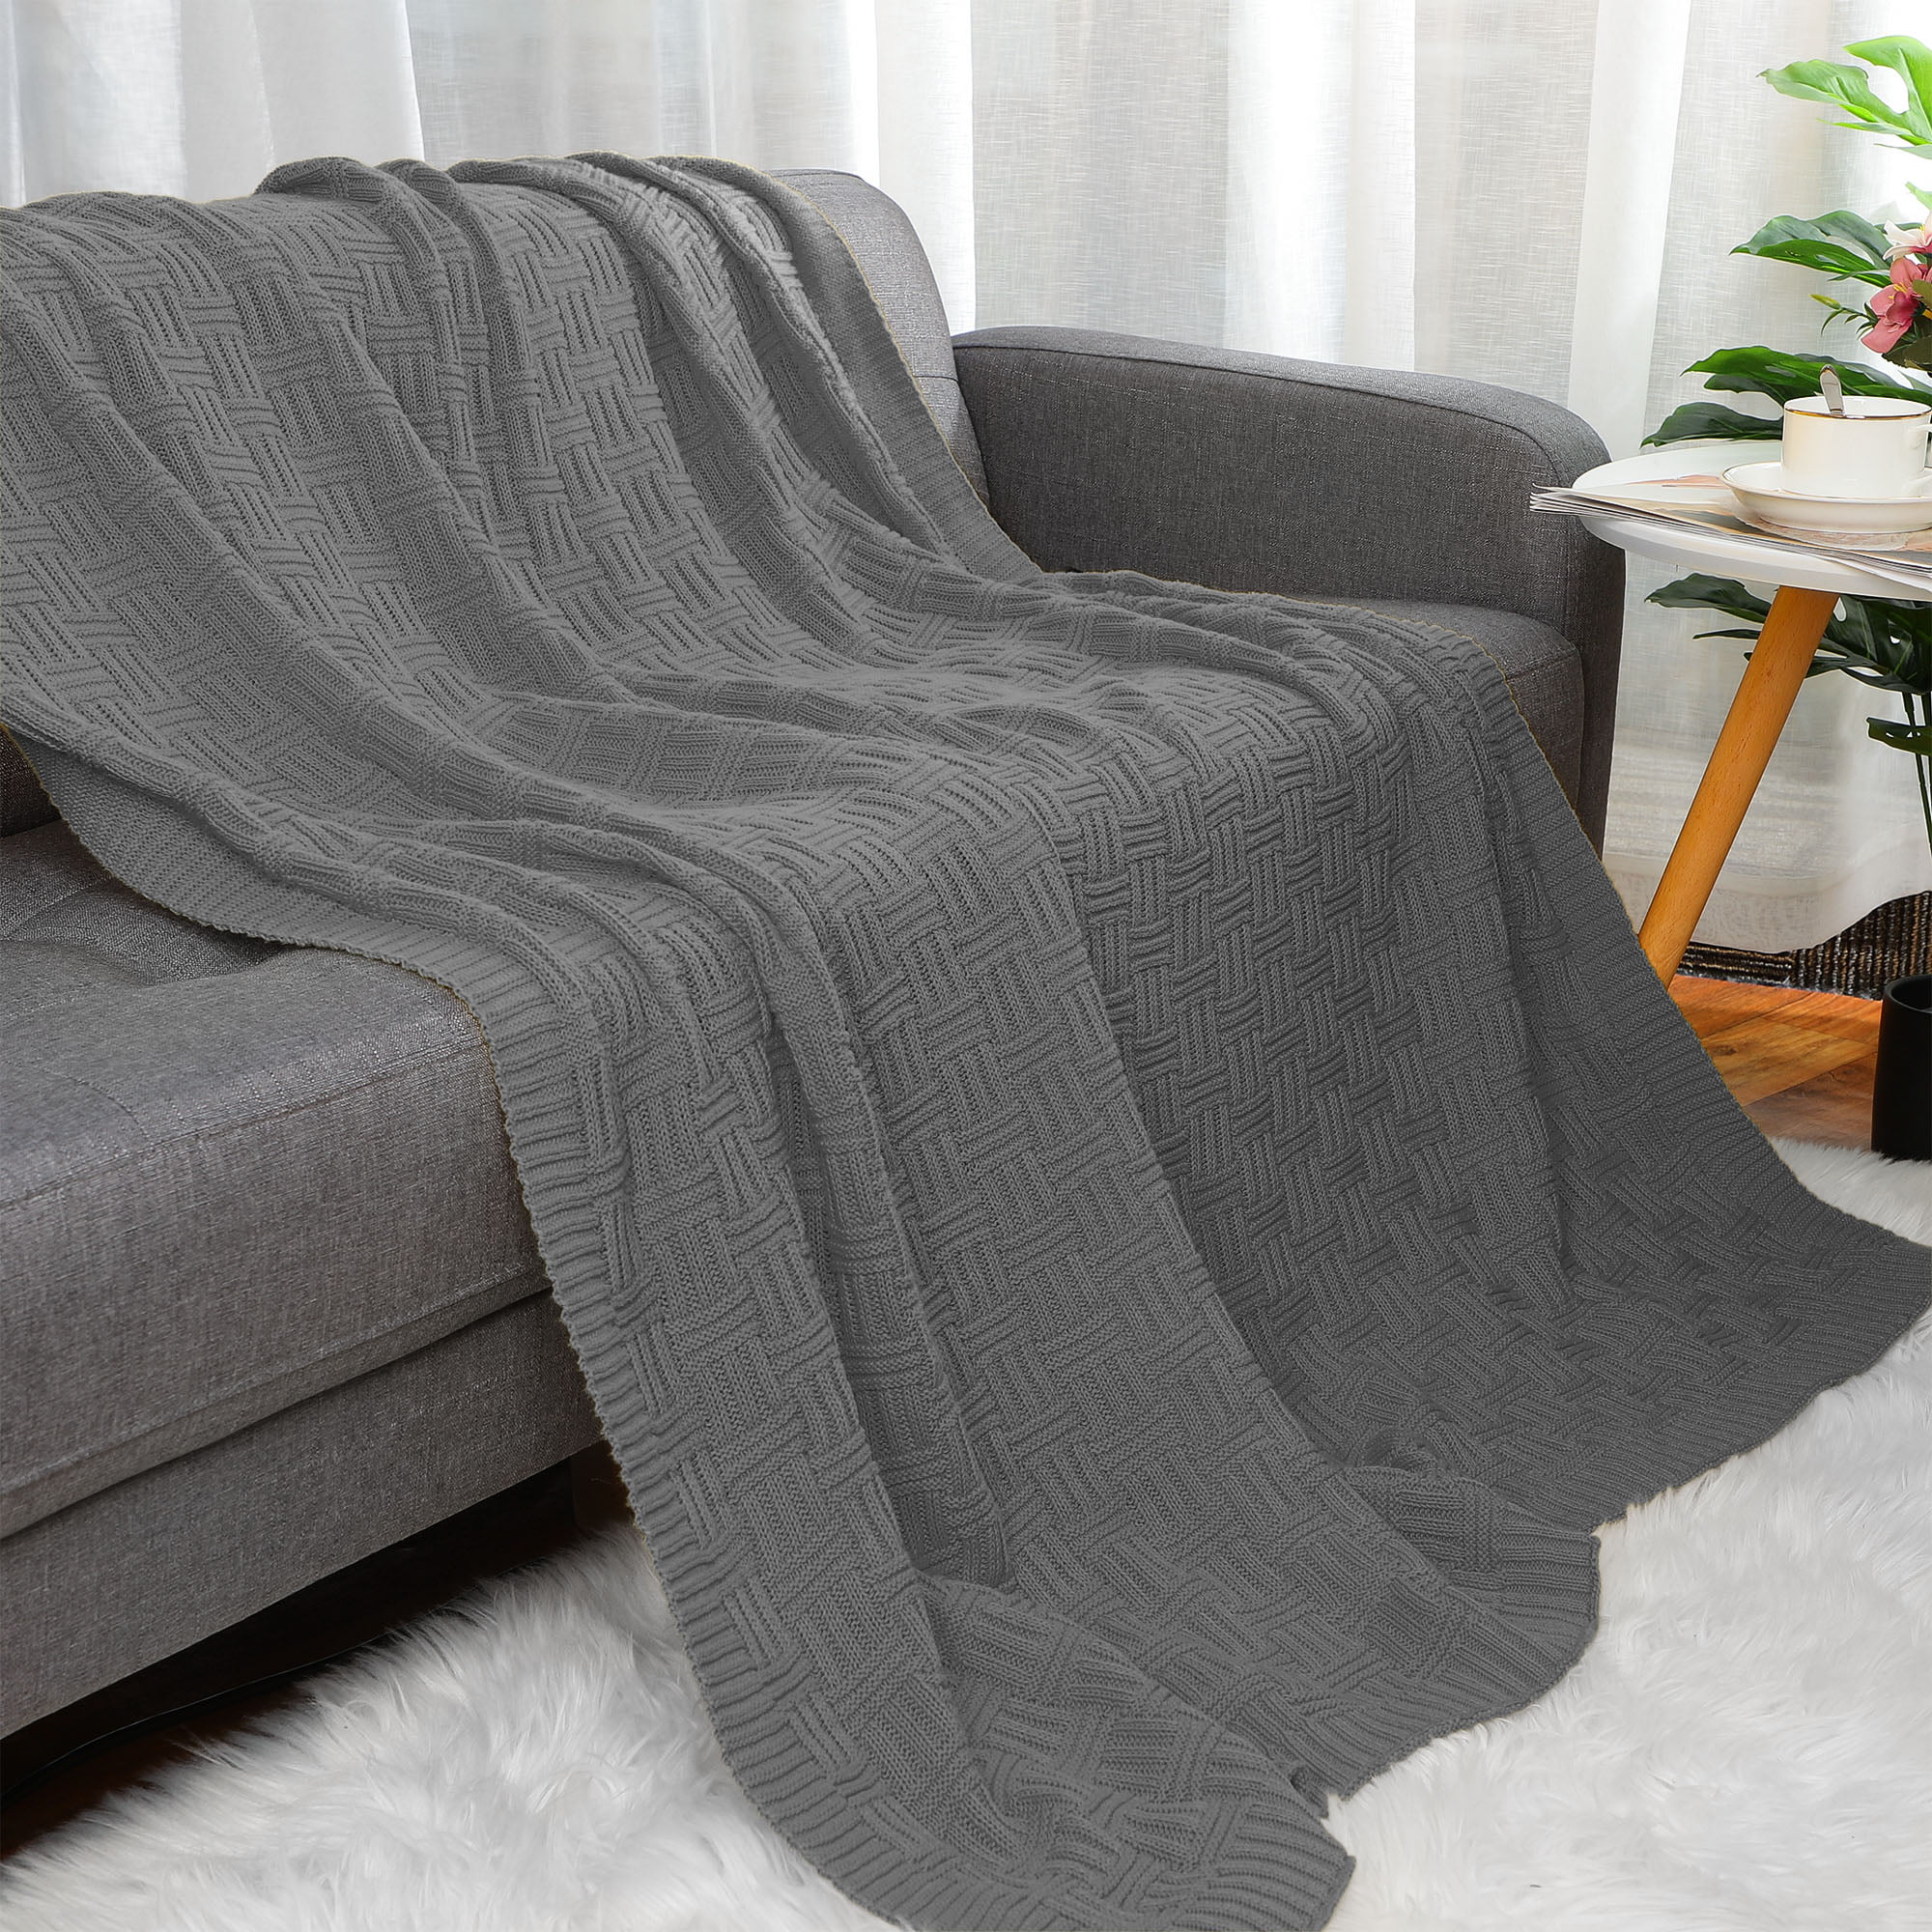 Details about   Stylish Hand Woven Sofa Bed Chair Blanket Throw Soft Chunky Cable Knit 